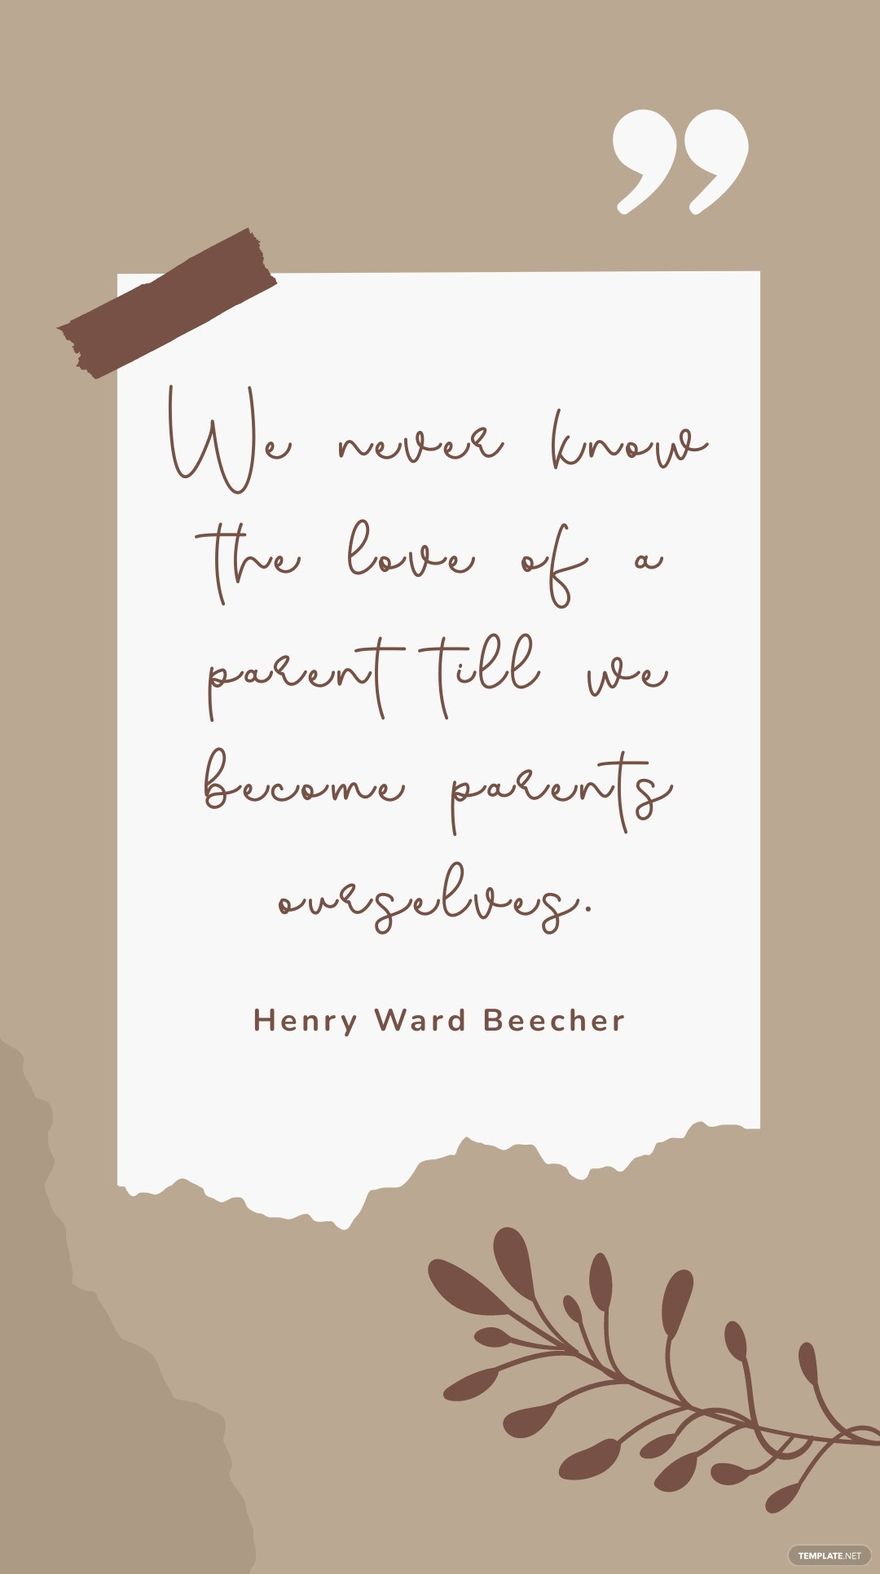 Henry Ward Beecher - We never know the love of a parent till we become parents ourselves. in JPG